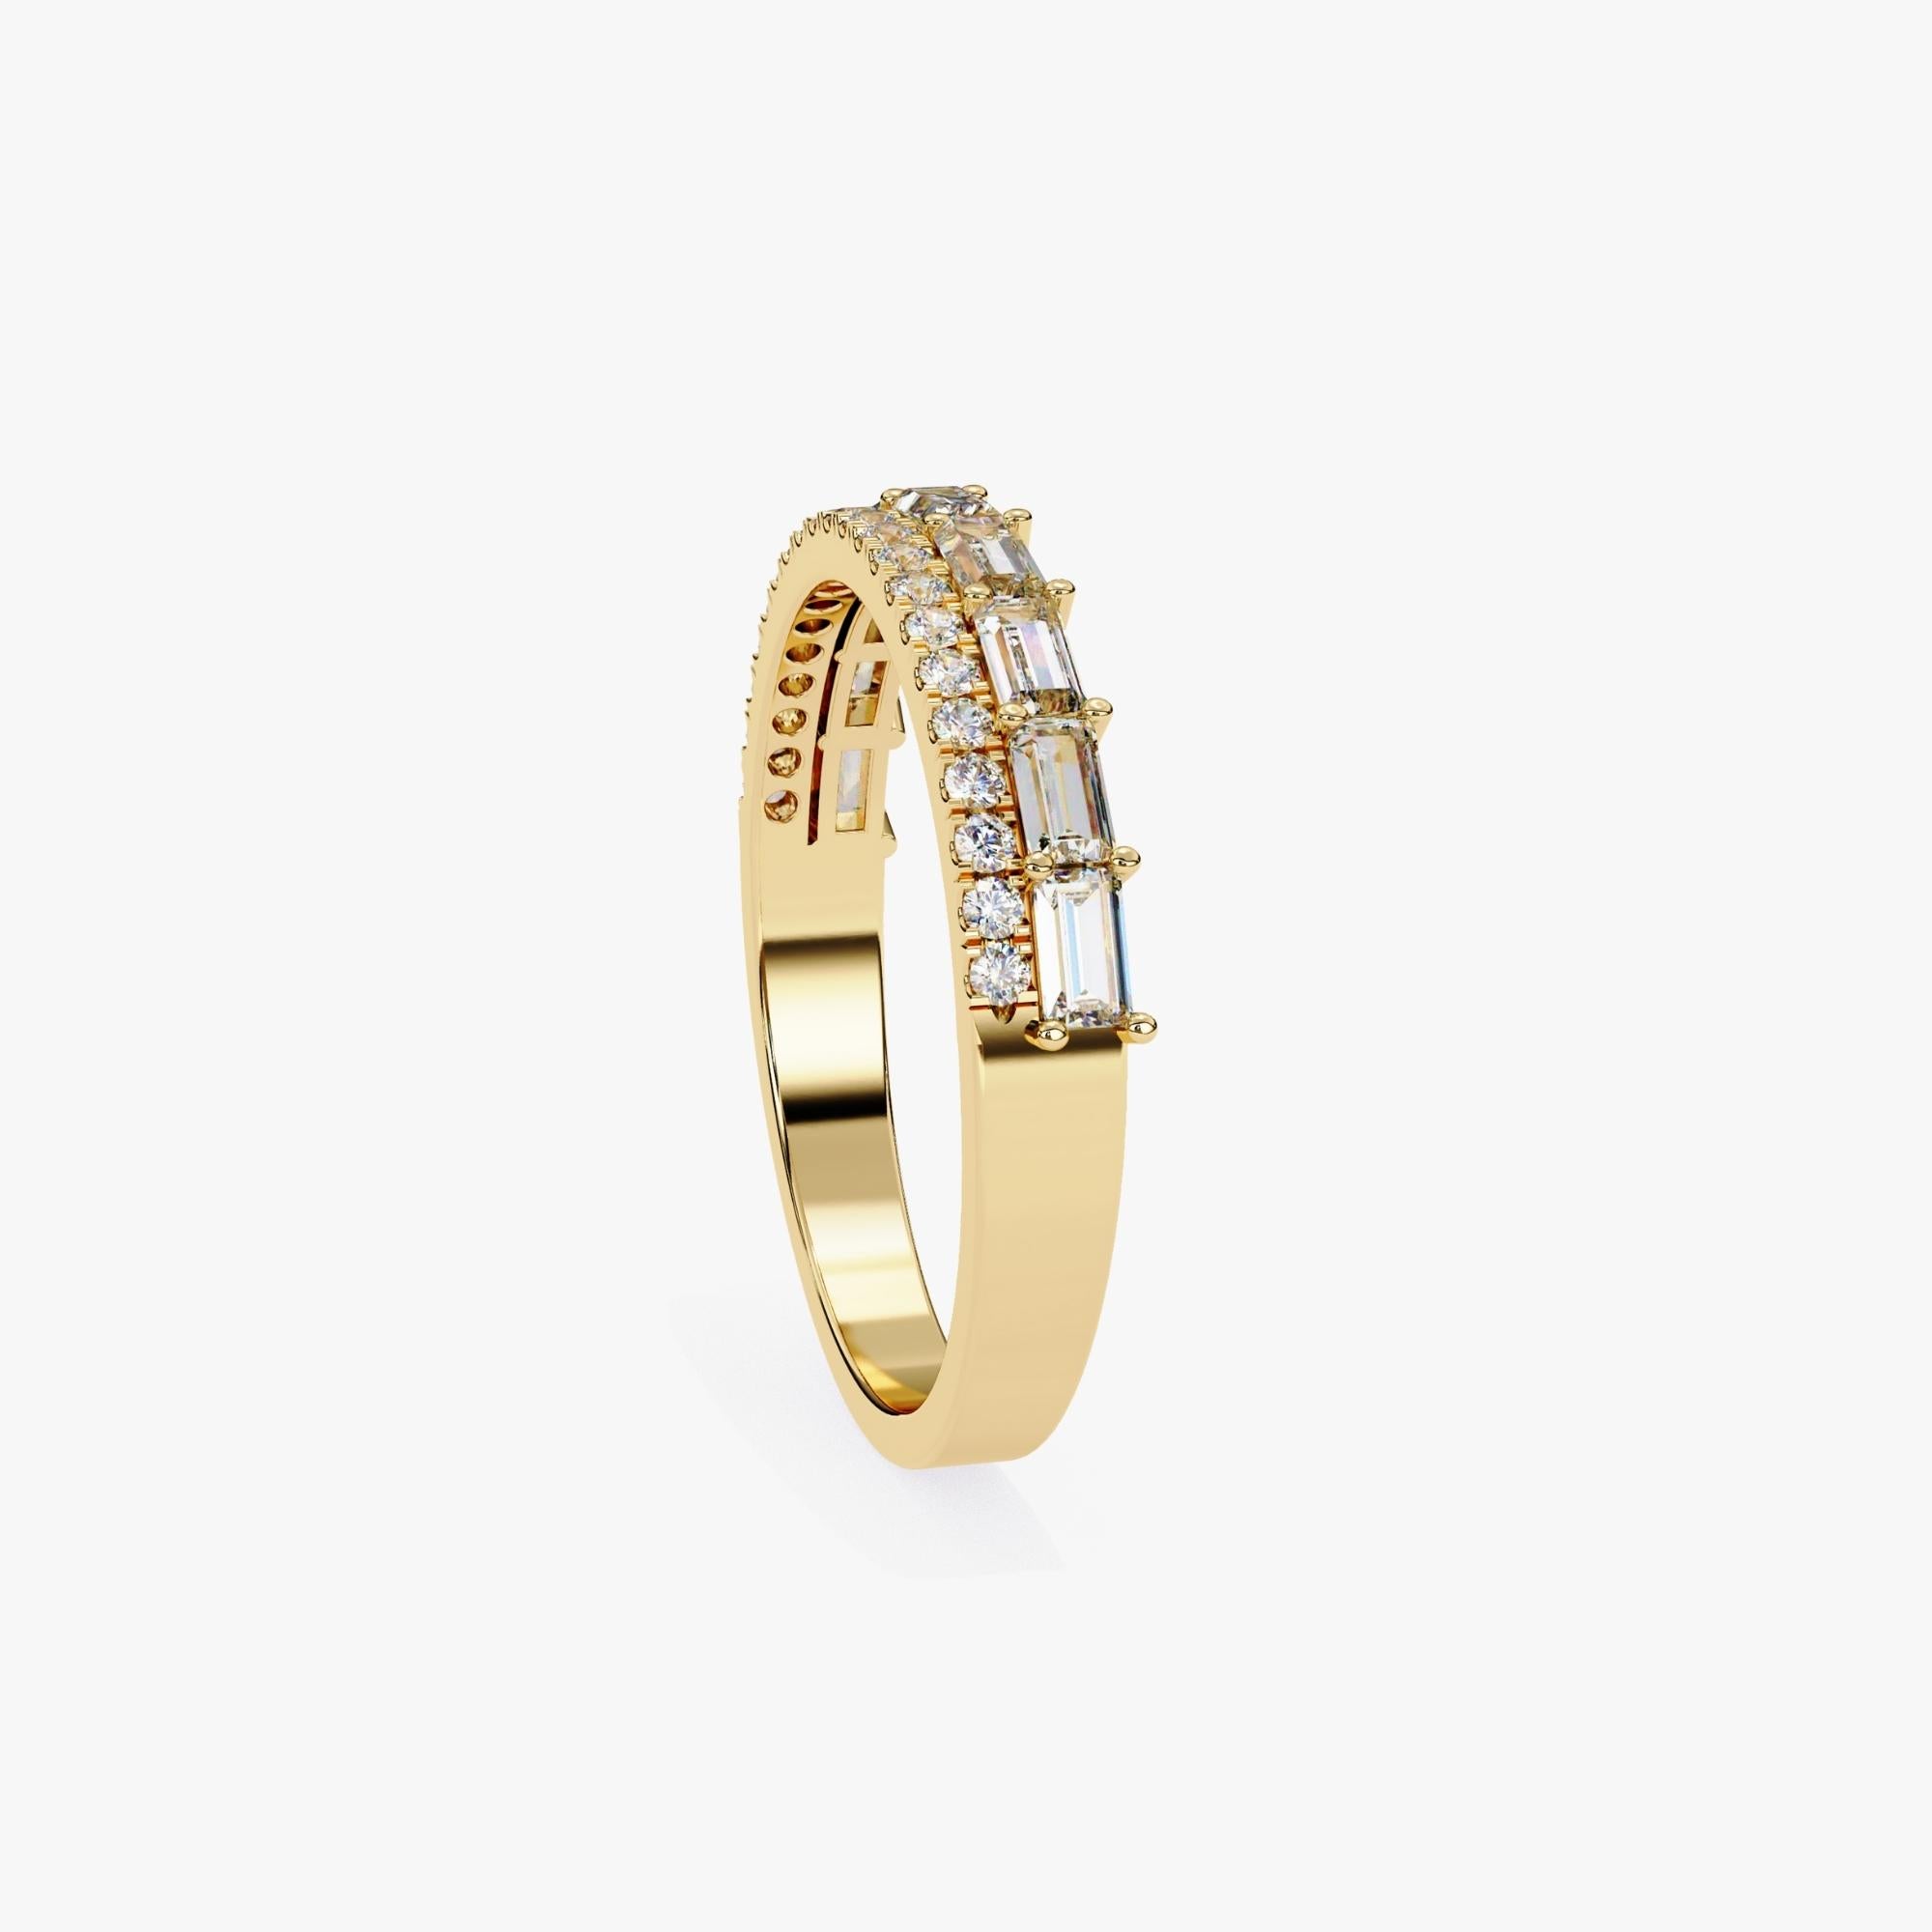 2/3 Carat TW, 14k Gold Diamond Band, Round and Baguette Diamonds, Half Eternity For Sale 2